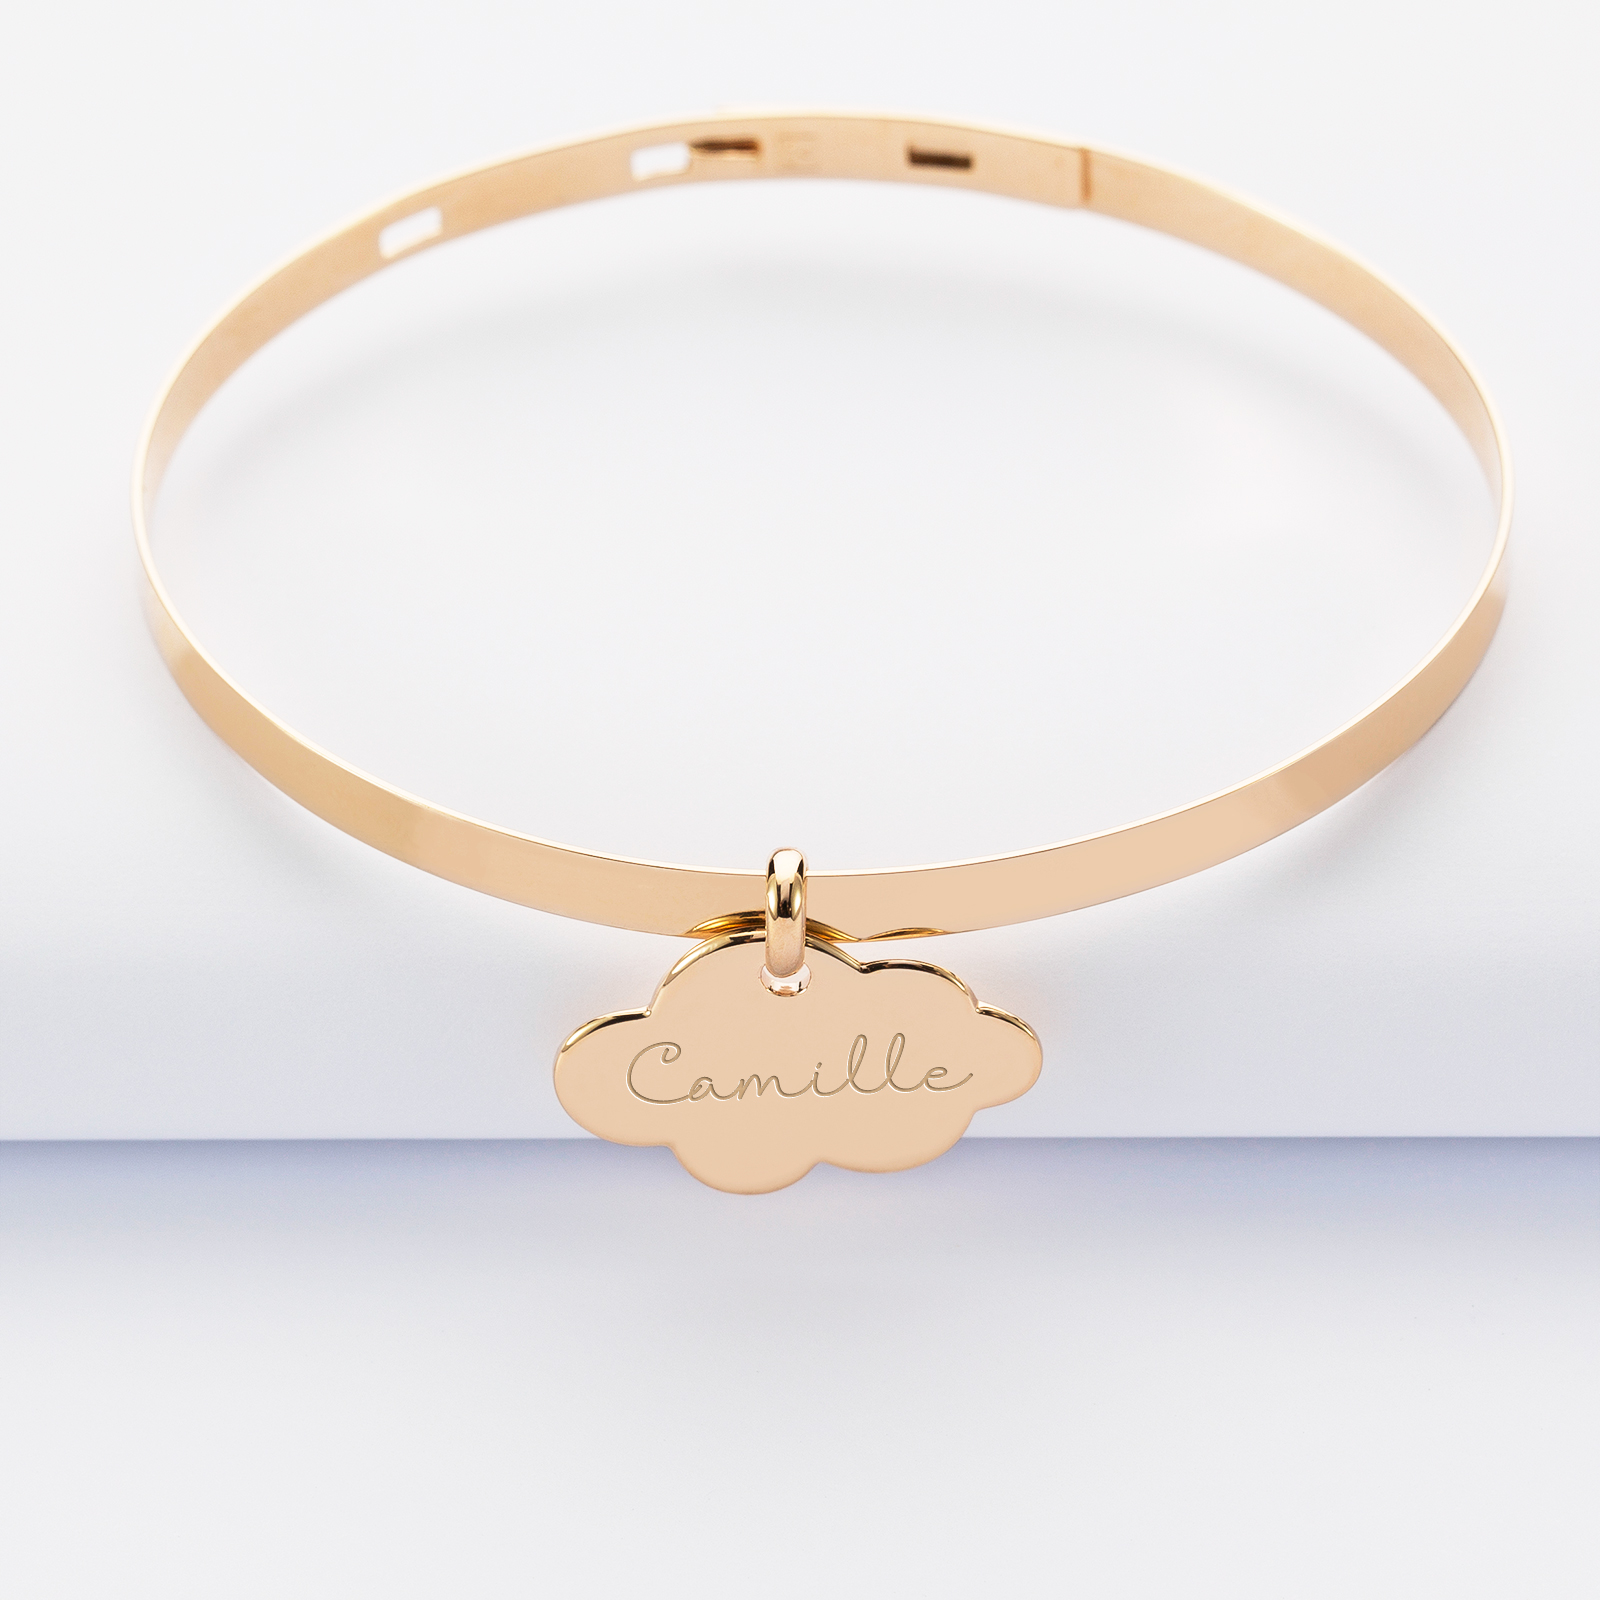 Personalised flat gold-plated bangle and engraved cloud medallion 20x14 mm - name